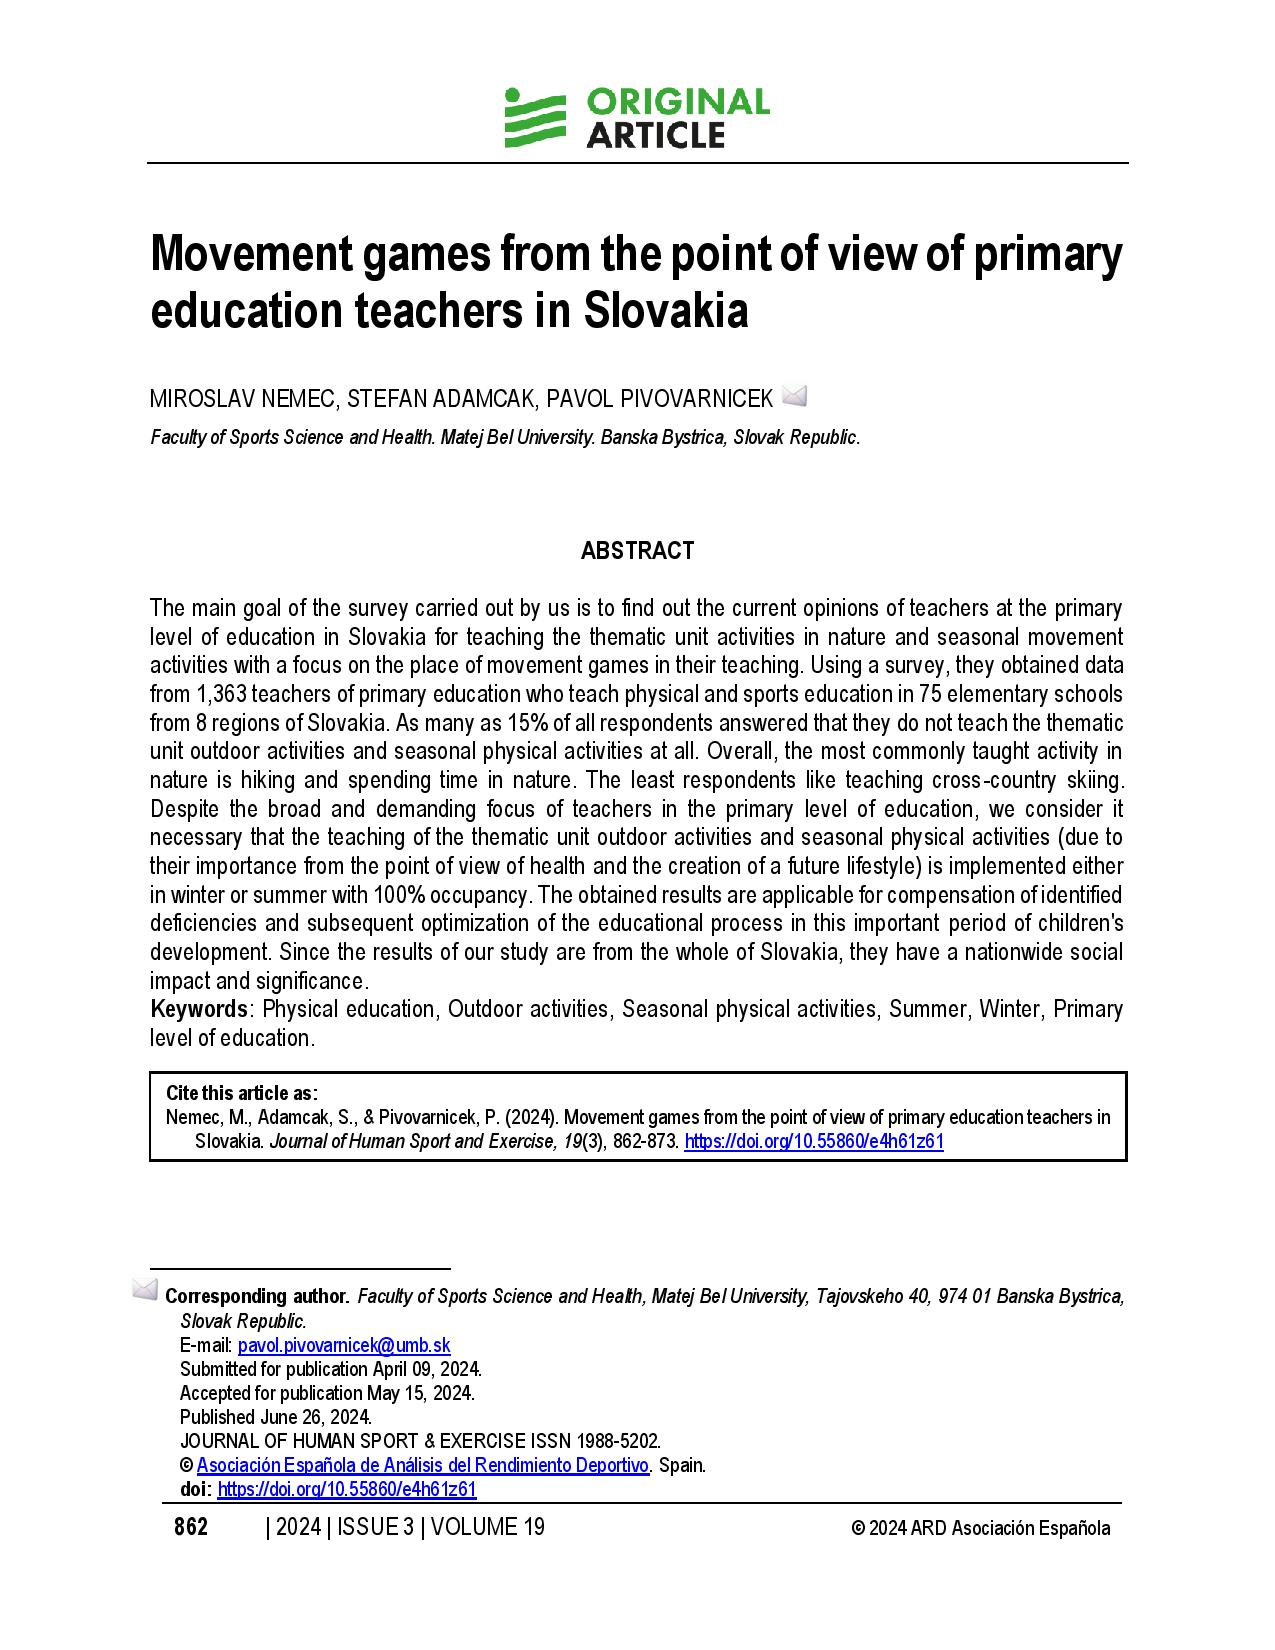 Movement games from the point of view of primary education teachers in Slovakia